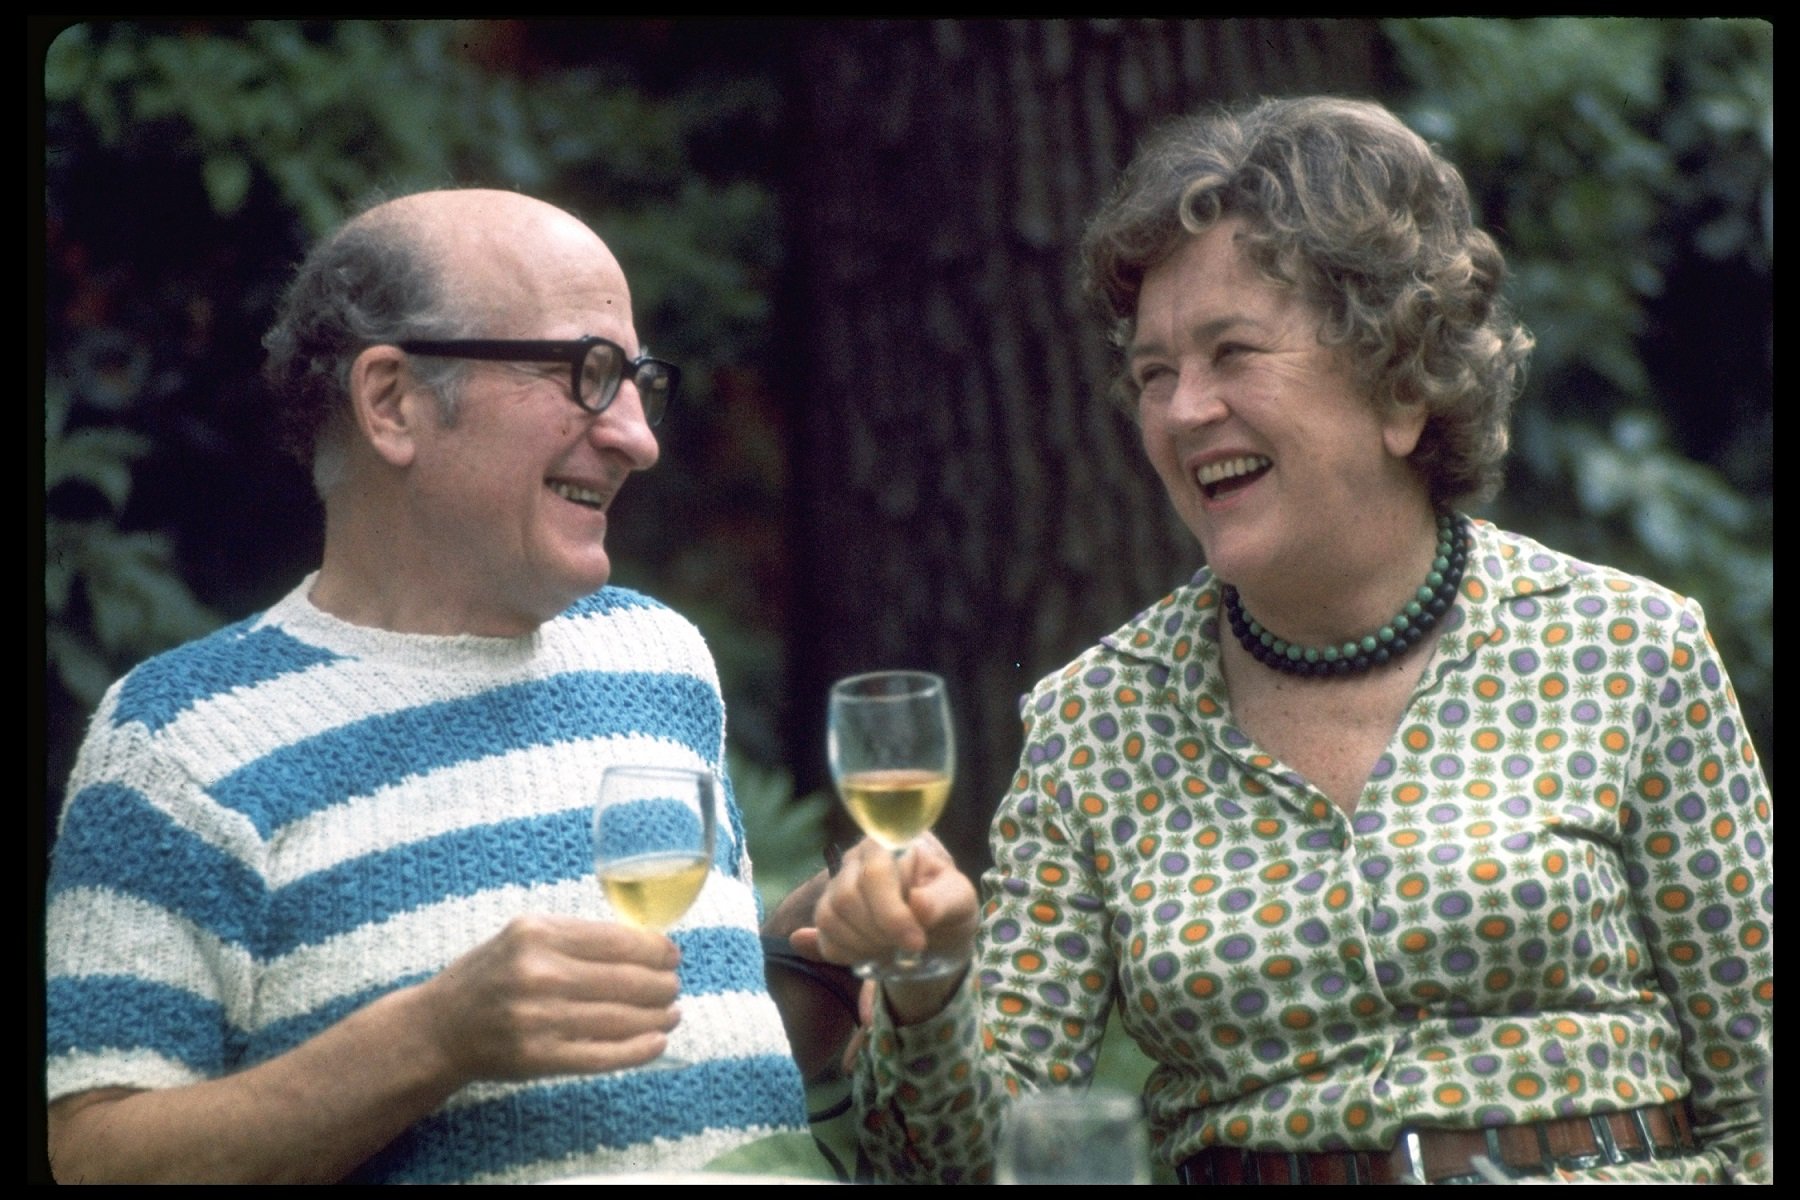 Julia Child (L) and husband, Paul Child, enjoying a glass of wine in outdoor setting.